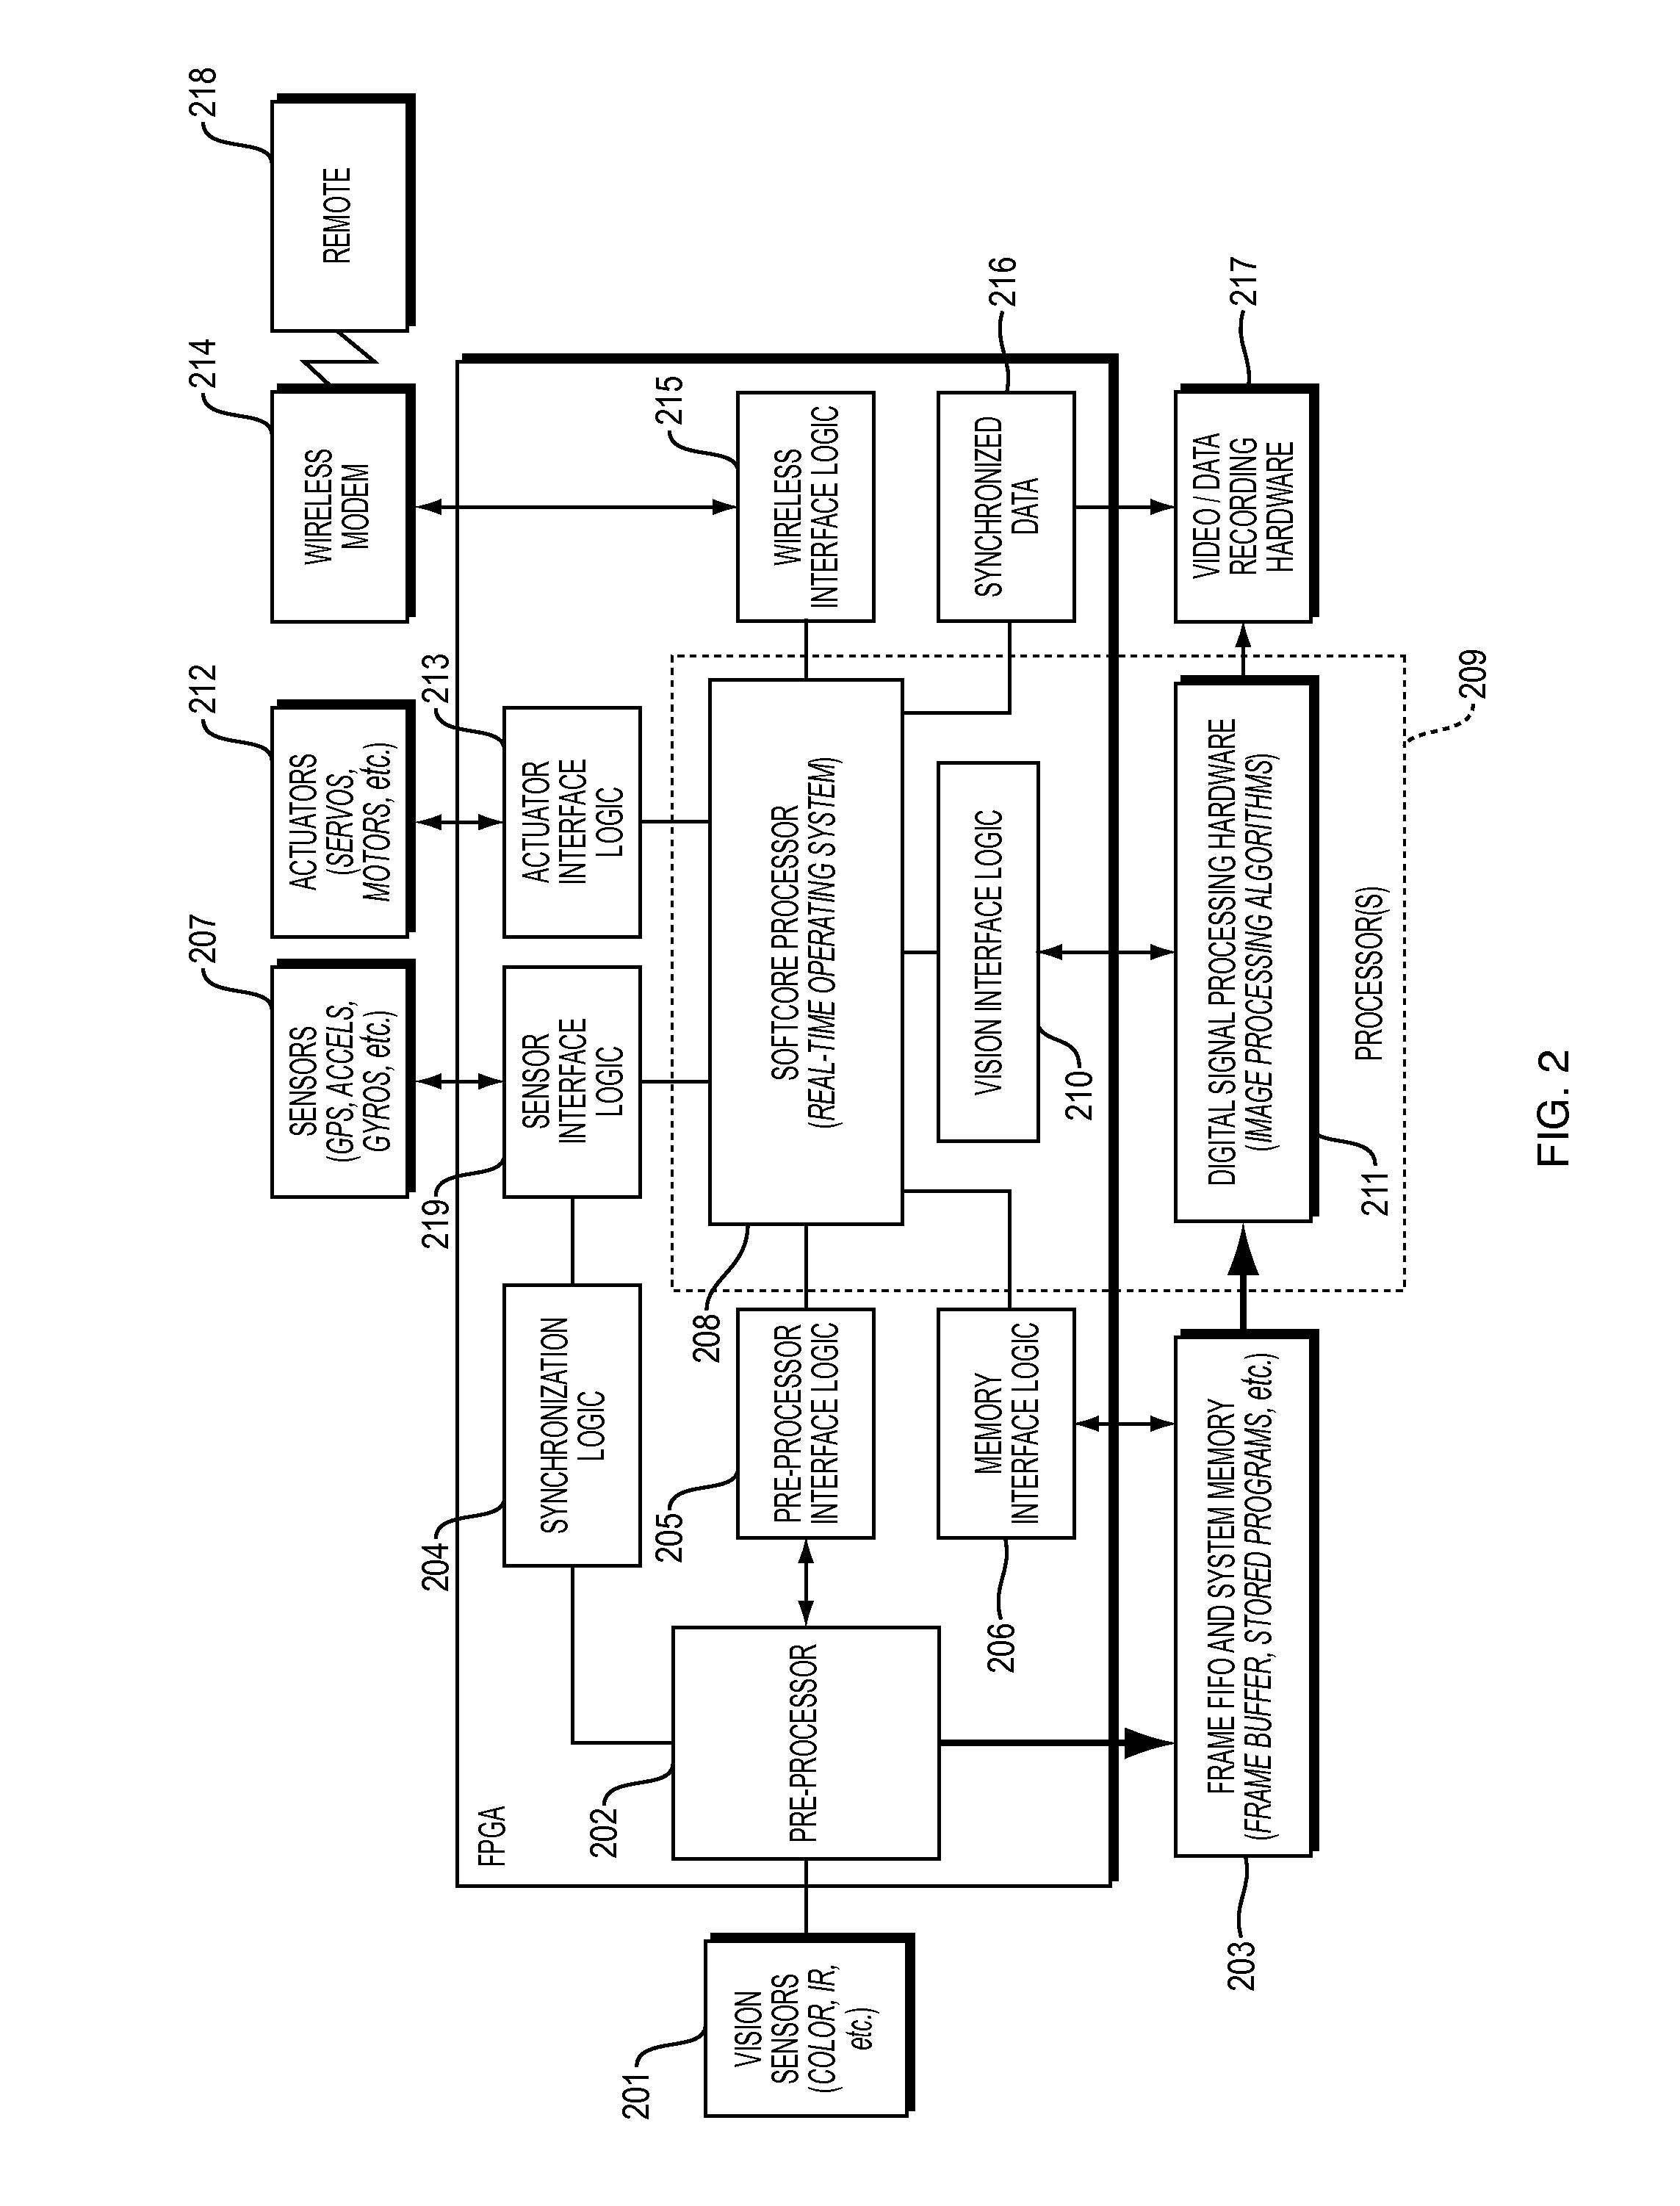 System and method for onboard vision processing